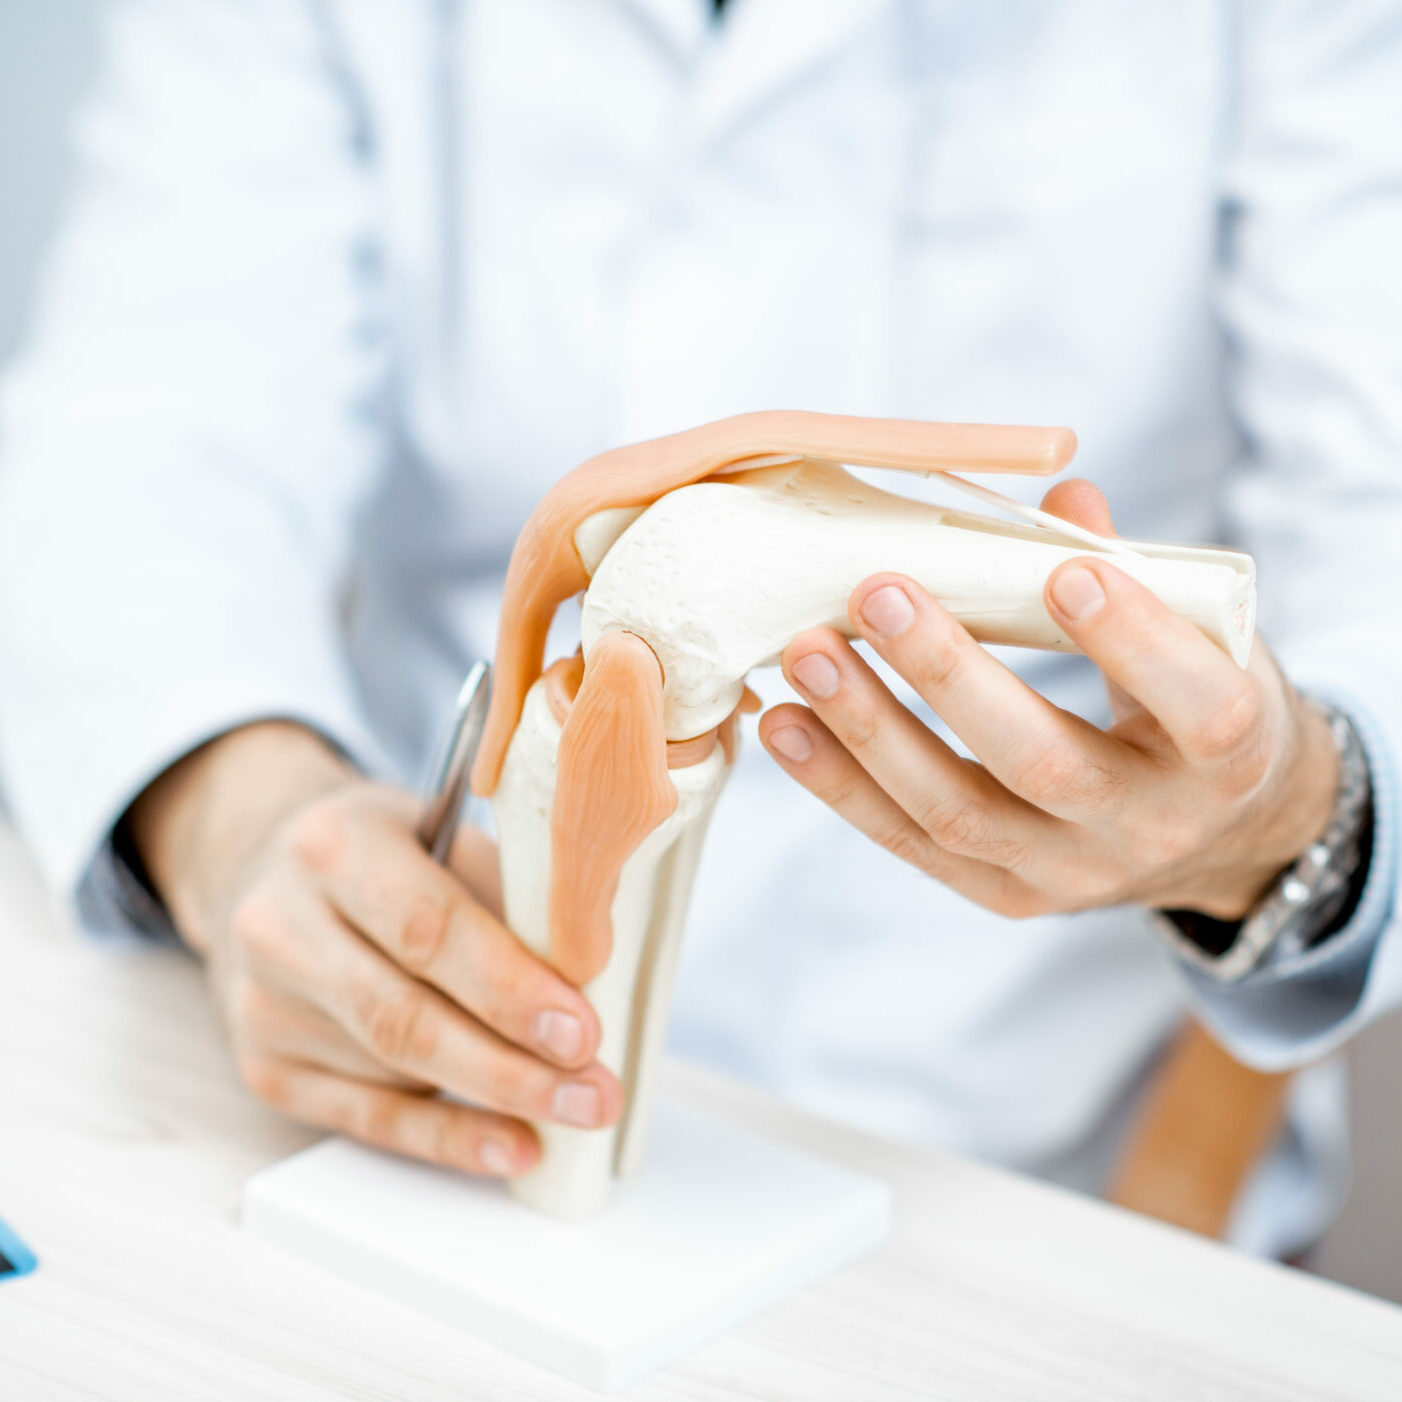 Close-up of the therapist showing knee joint model during the medical consultation